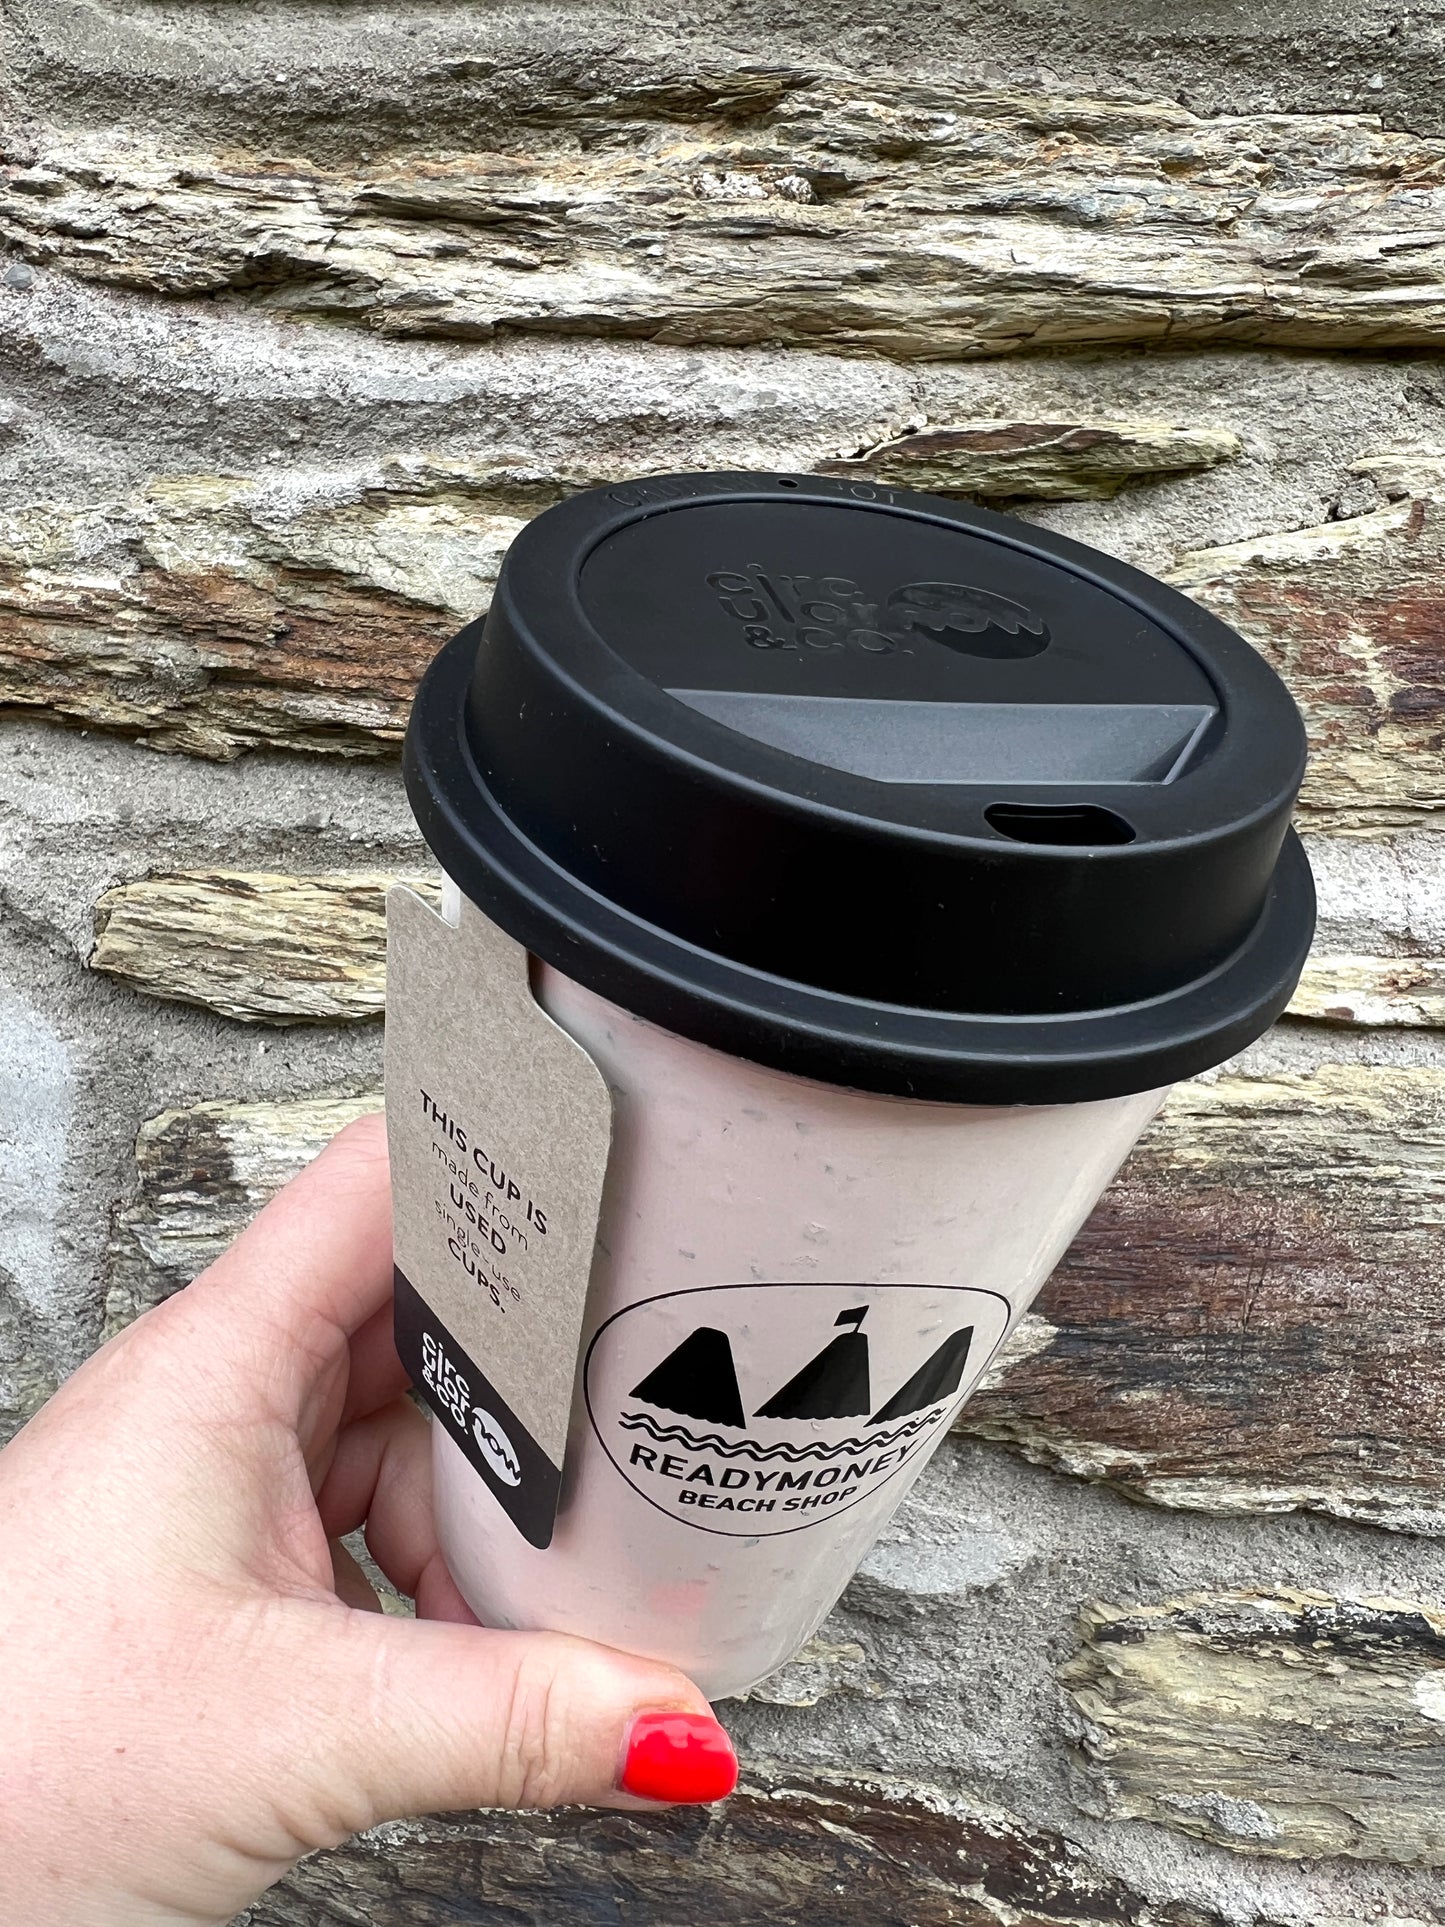 Readymoney Beach Shop Circular & Co NOW Cup - Reusable 12oz Coffee Cup made from used single use cups